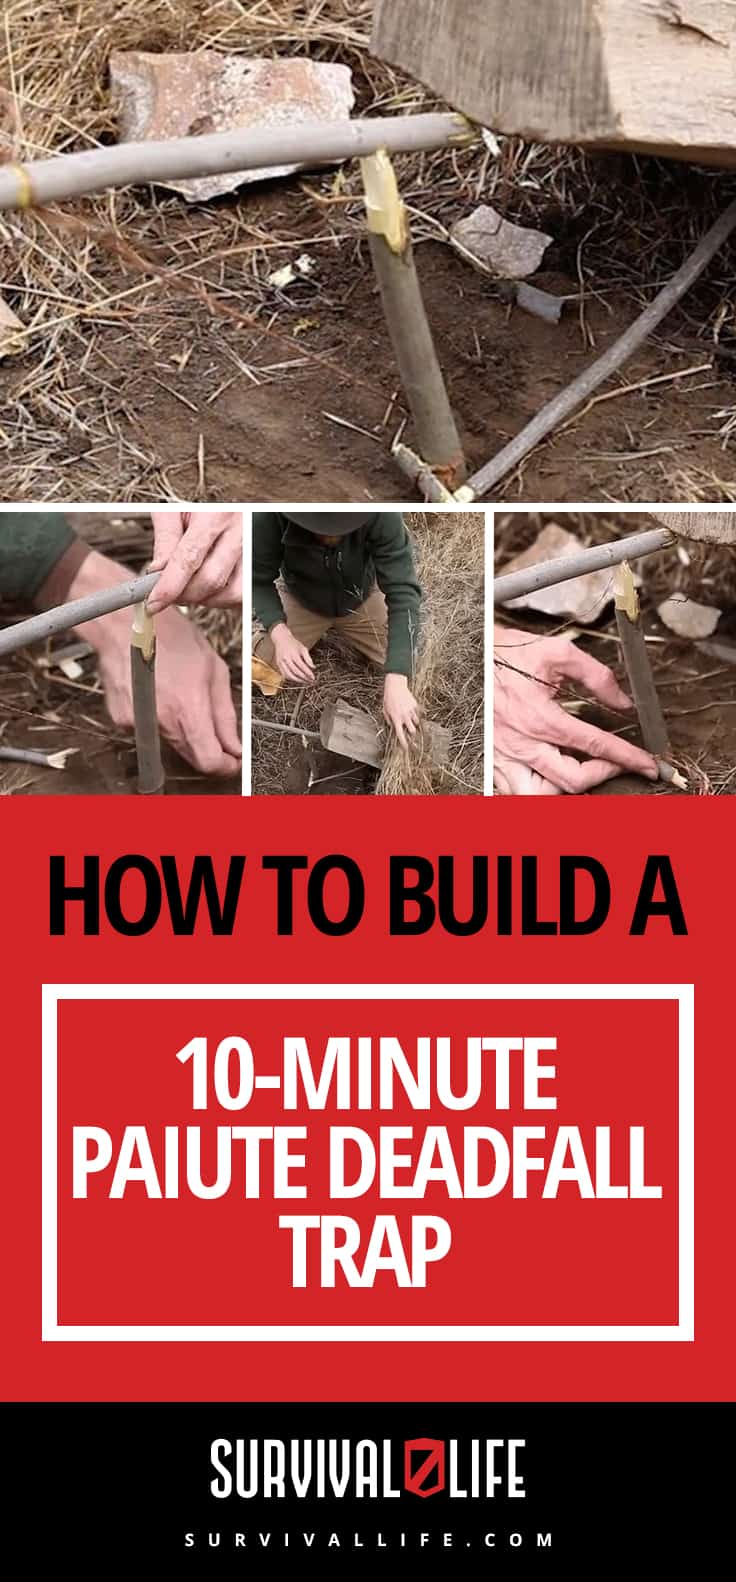 How To Build a 10-Minute Paiute Deadfall Trap